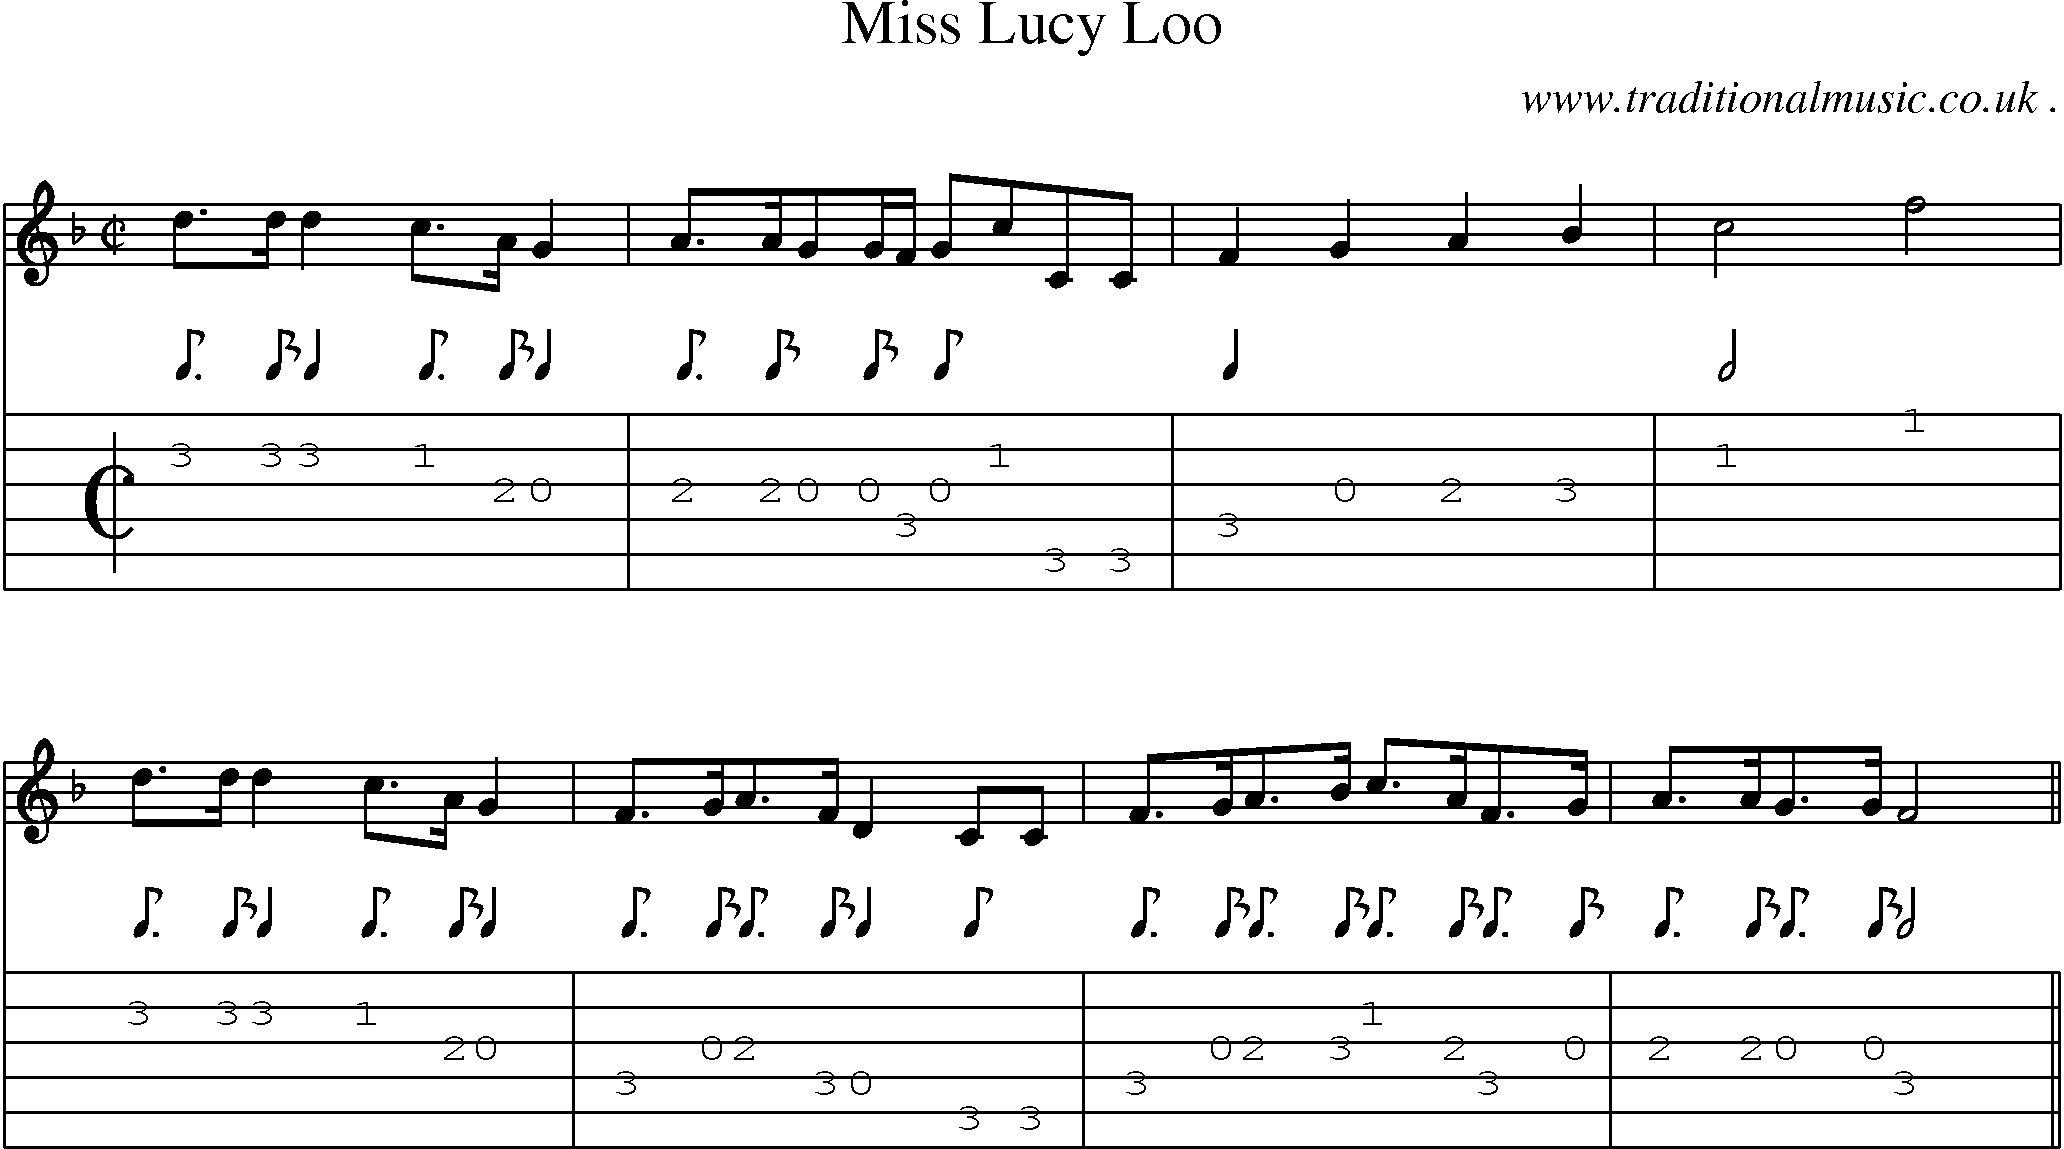 Sheet-Music and Guitar Tabs for Miss Lucy Loo